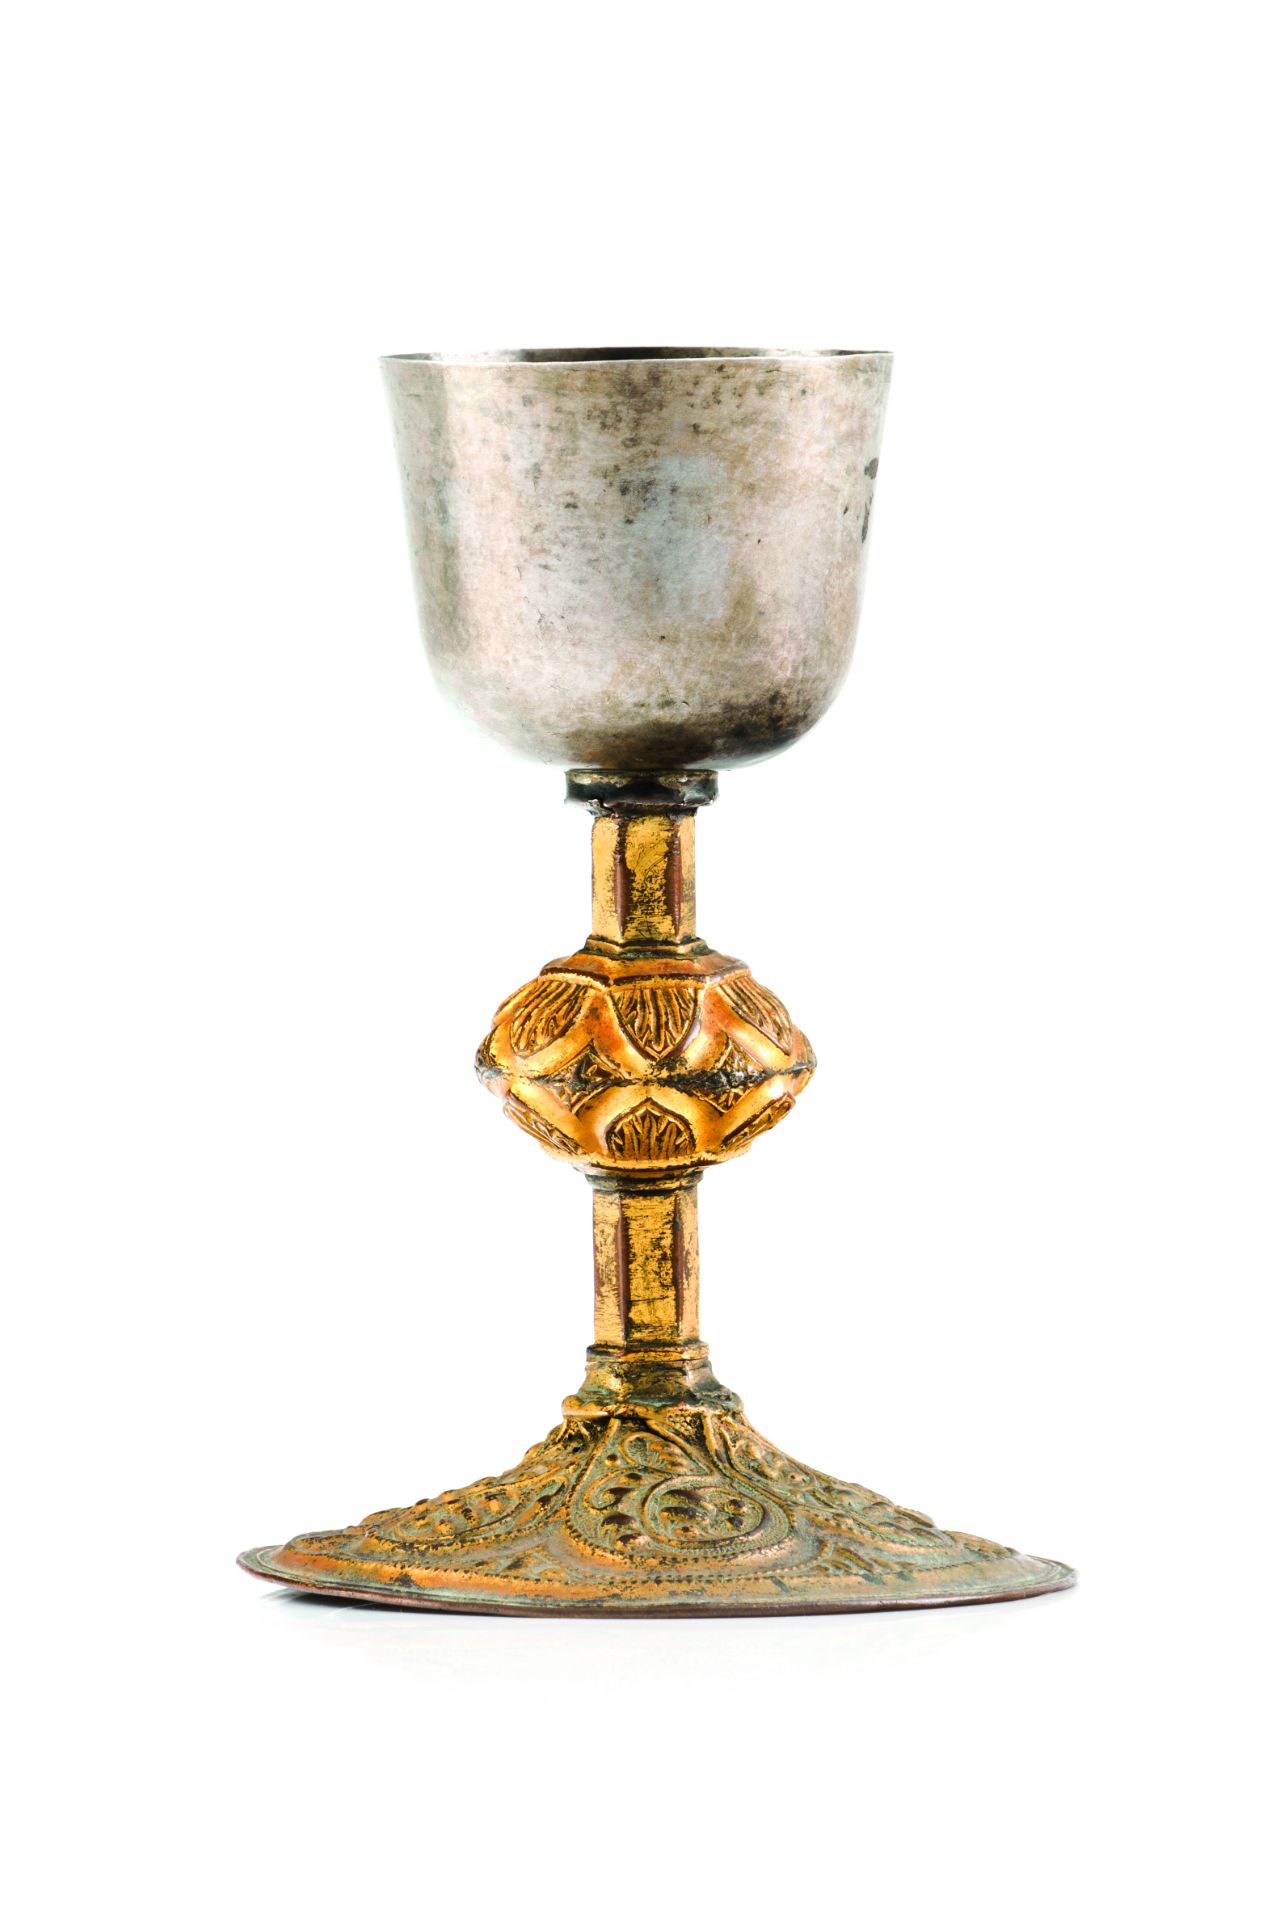 A late gothic Iberian chaliceSilver and copper, 15th/16th centuryRepousse and gilt decoration of